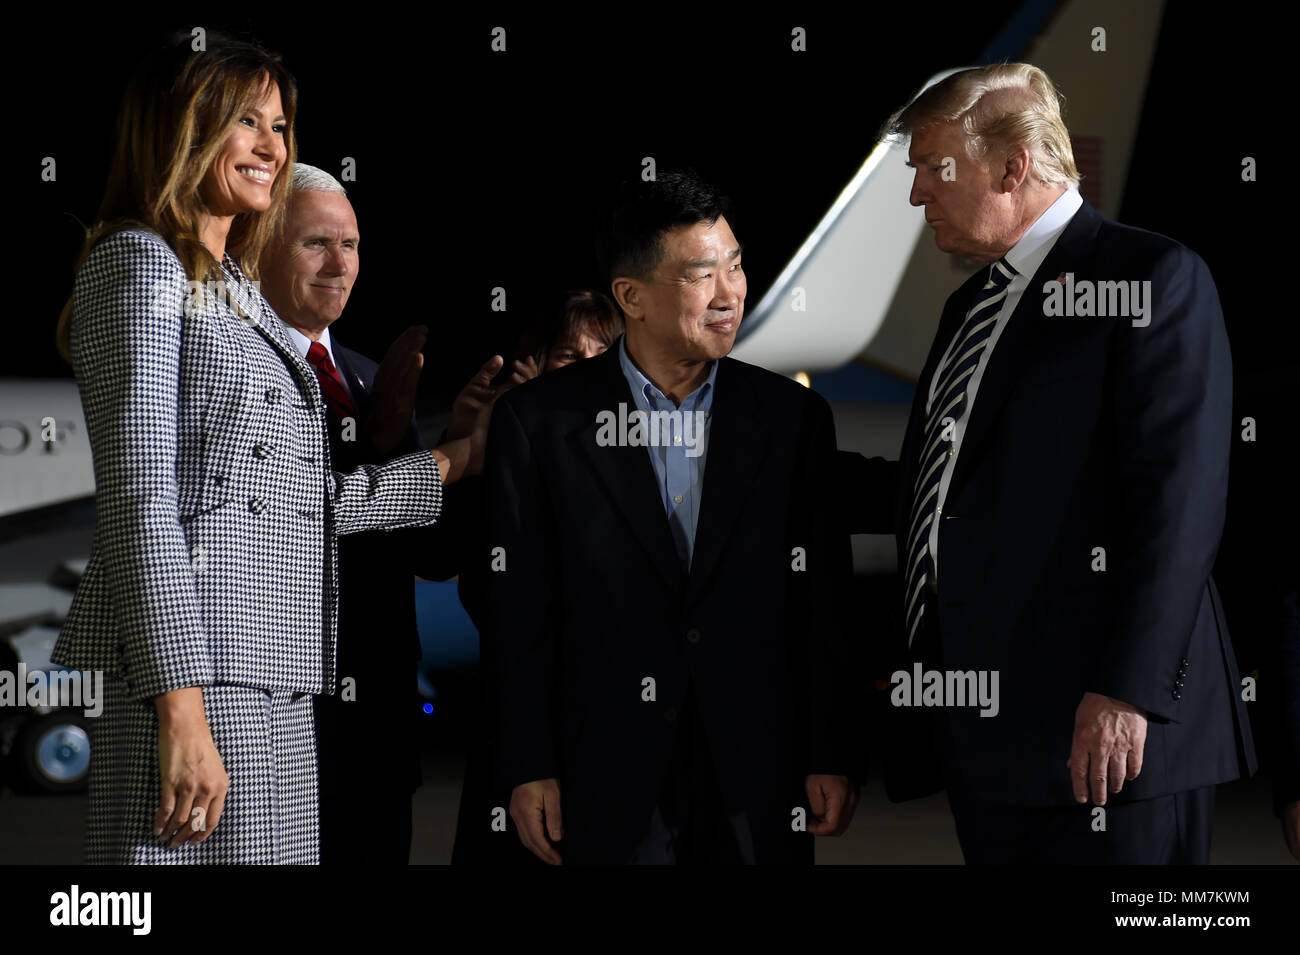 U.S. President Donald Trump, Vice President Mike Pence and First Lady Melania Trump welcome home three American detainees freed by North Korea on arrival at Joint Base Andrews May 10, 2018 in Clinton, Maryland. The three include Kim Dong-chul, Tony Kim and Kim Hak-song released as a gesture of goodwill ahead of the planned meeting between Trump and North Korean leader Kim Jong-un. Stock Photo